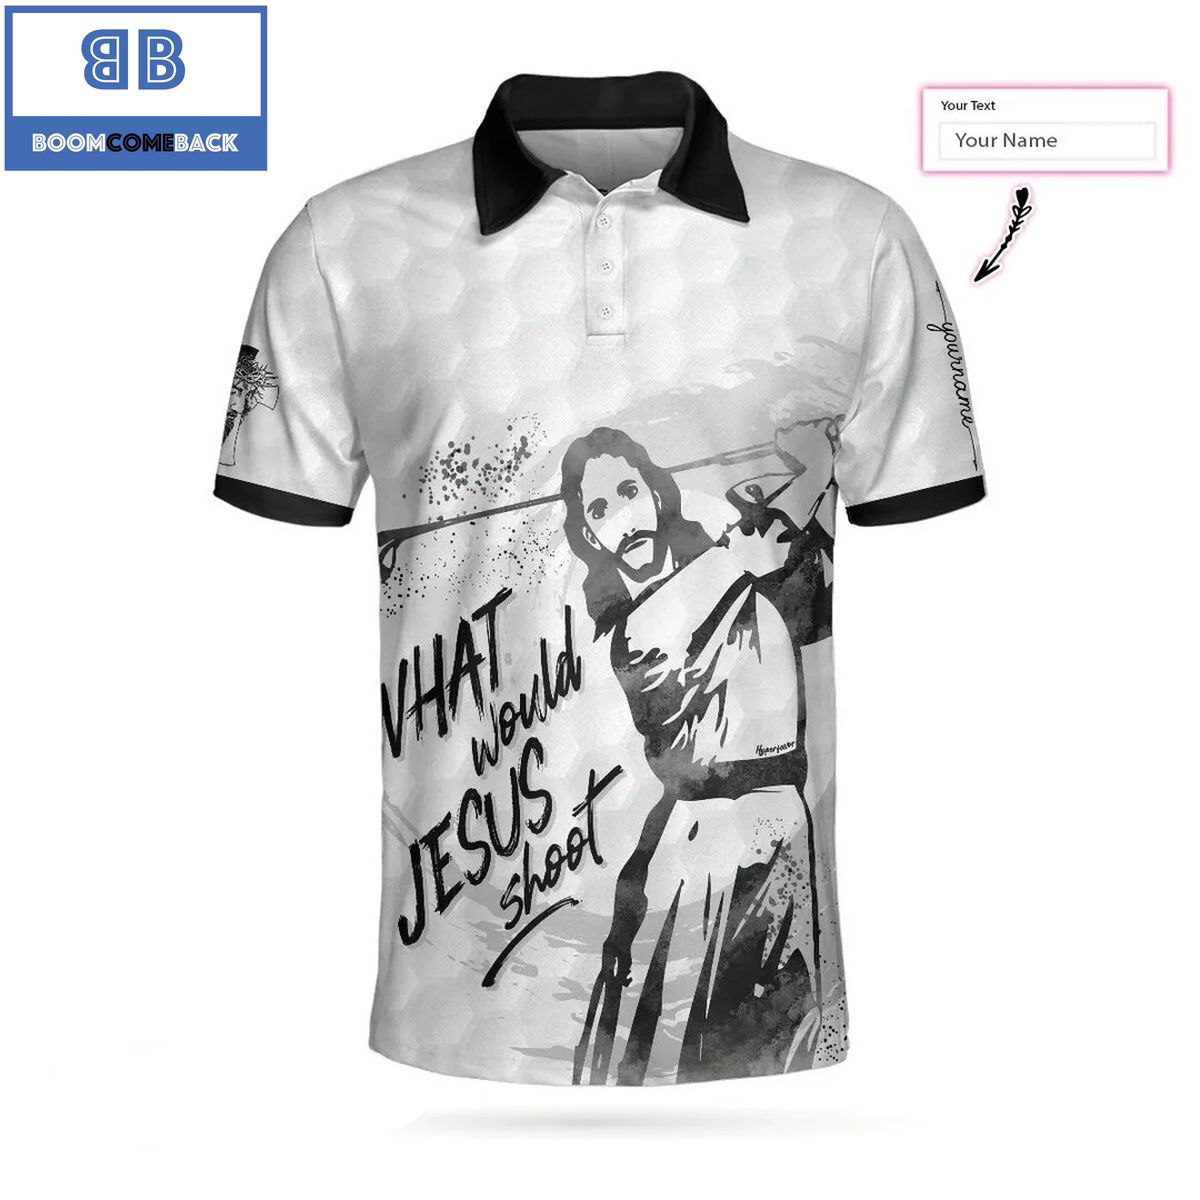 Personalized2BWhat2BWould2BJesus2BShoot2BAthletic2BCollared2BMens2BPolo2BShirt2B3 WrZ6d